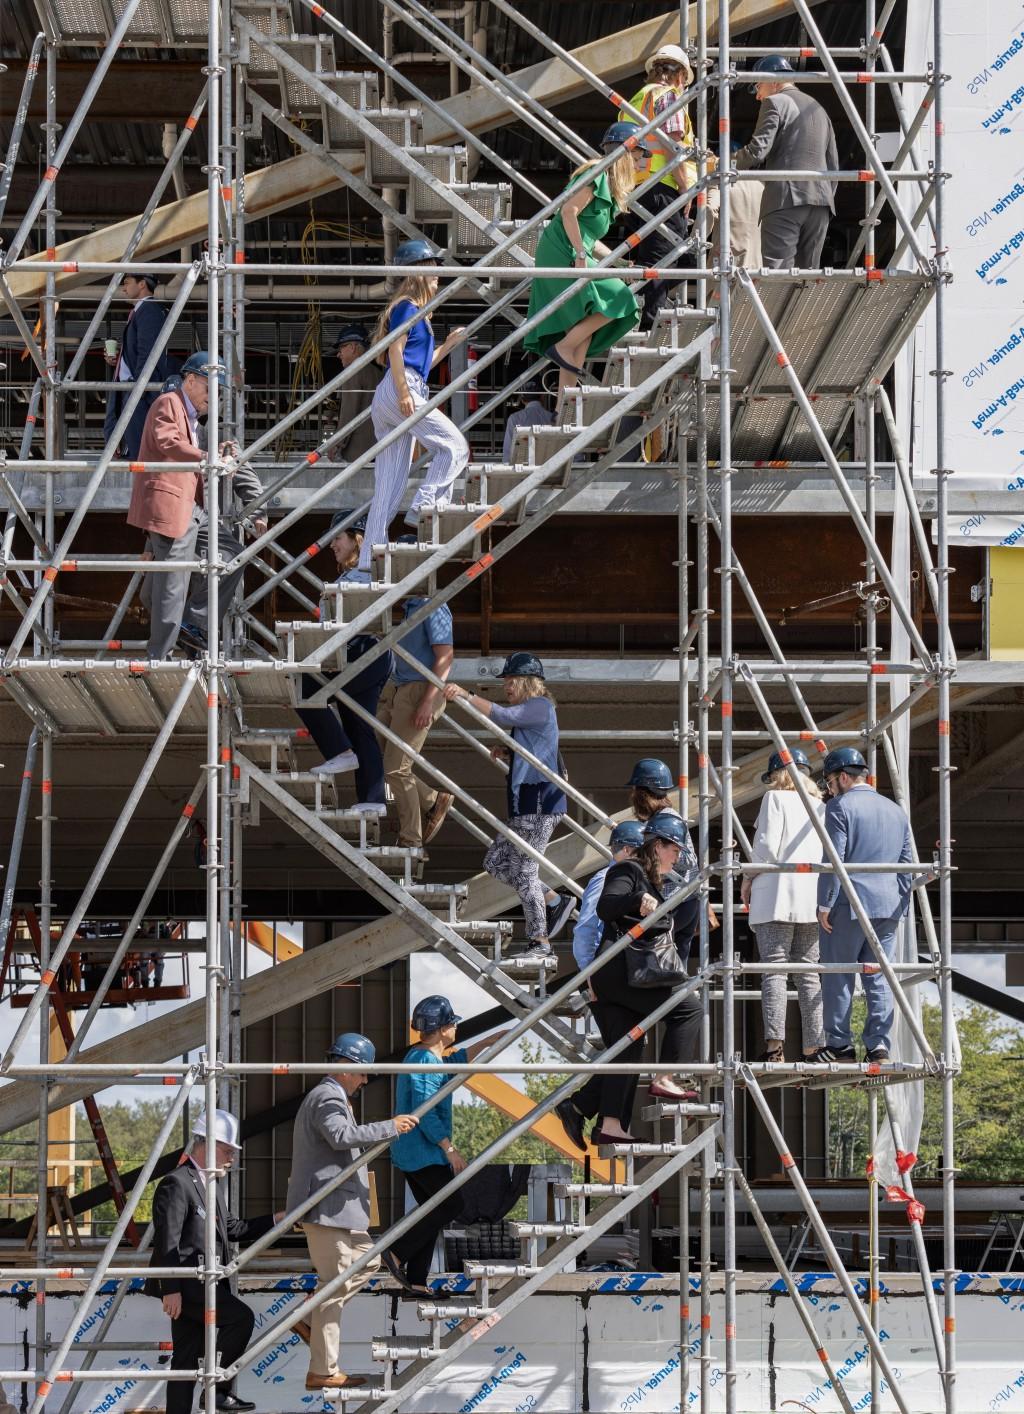 A group of people in construction hats climb the stairs of a building under construction